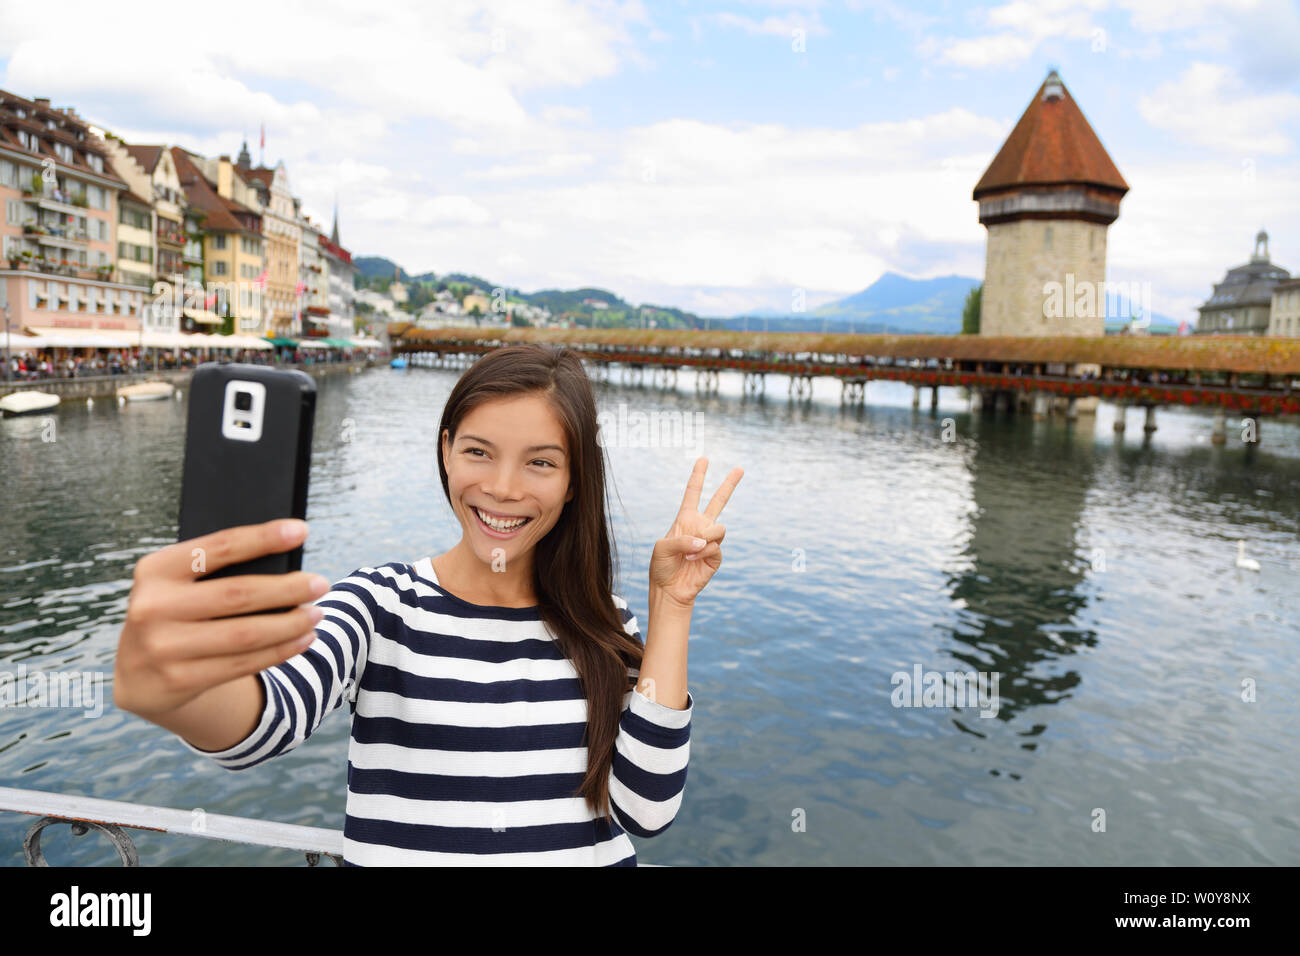 Tourist selfie woman taking self portrait photograph picture with smartphone in Lucerne Switzerland. Travel woman with smart phone by Kapellbrucke Chapel Bridge and Wasserturm water tower, Reuss River Stock Photo